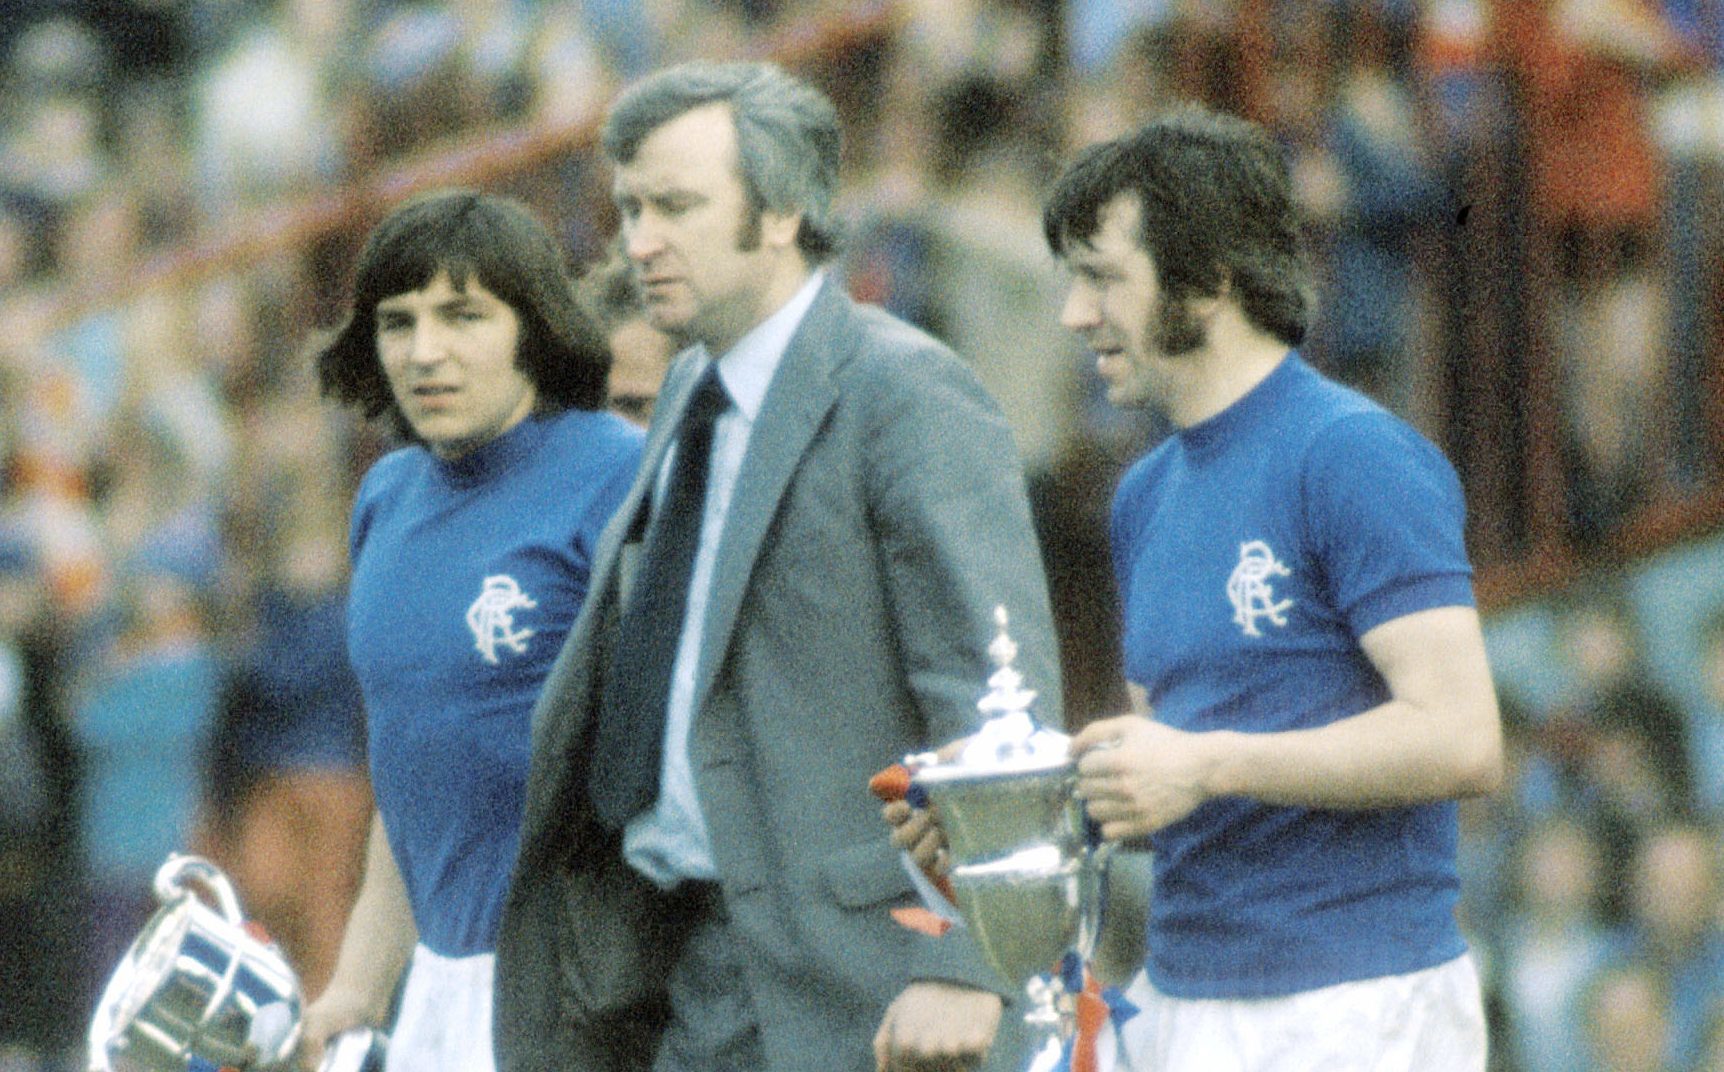 Rangers' John Hamilton (left) with the Reserve League trophy beside manager Jock Wallace and John Greig with the Premier League trophy, 1975 (SNS Group)